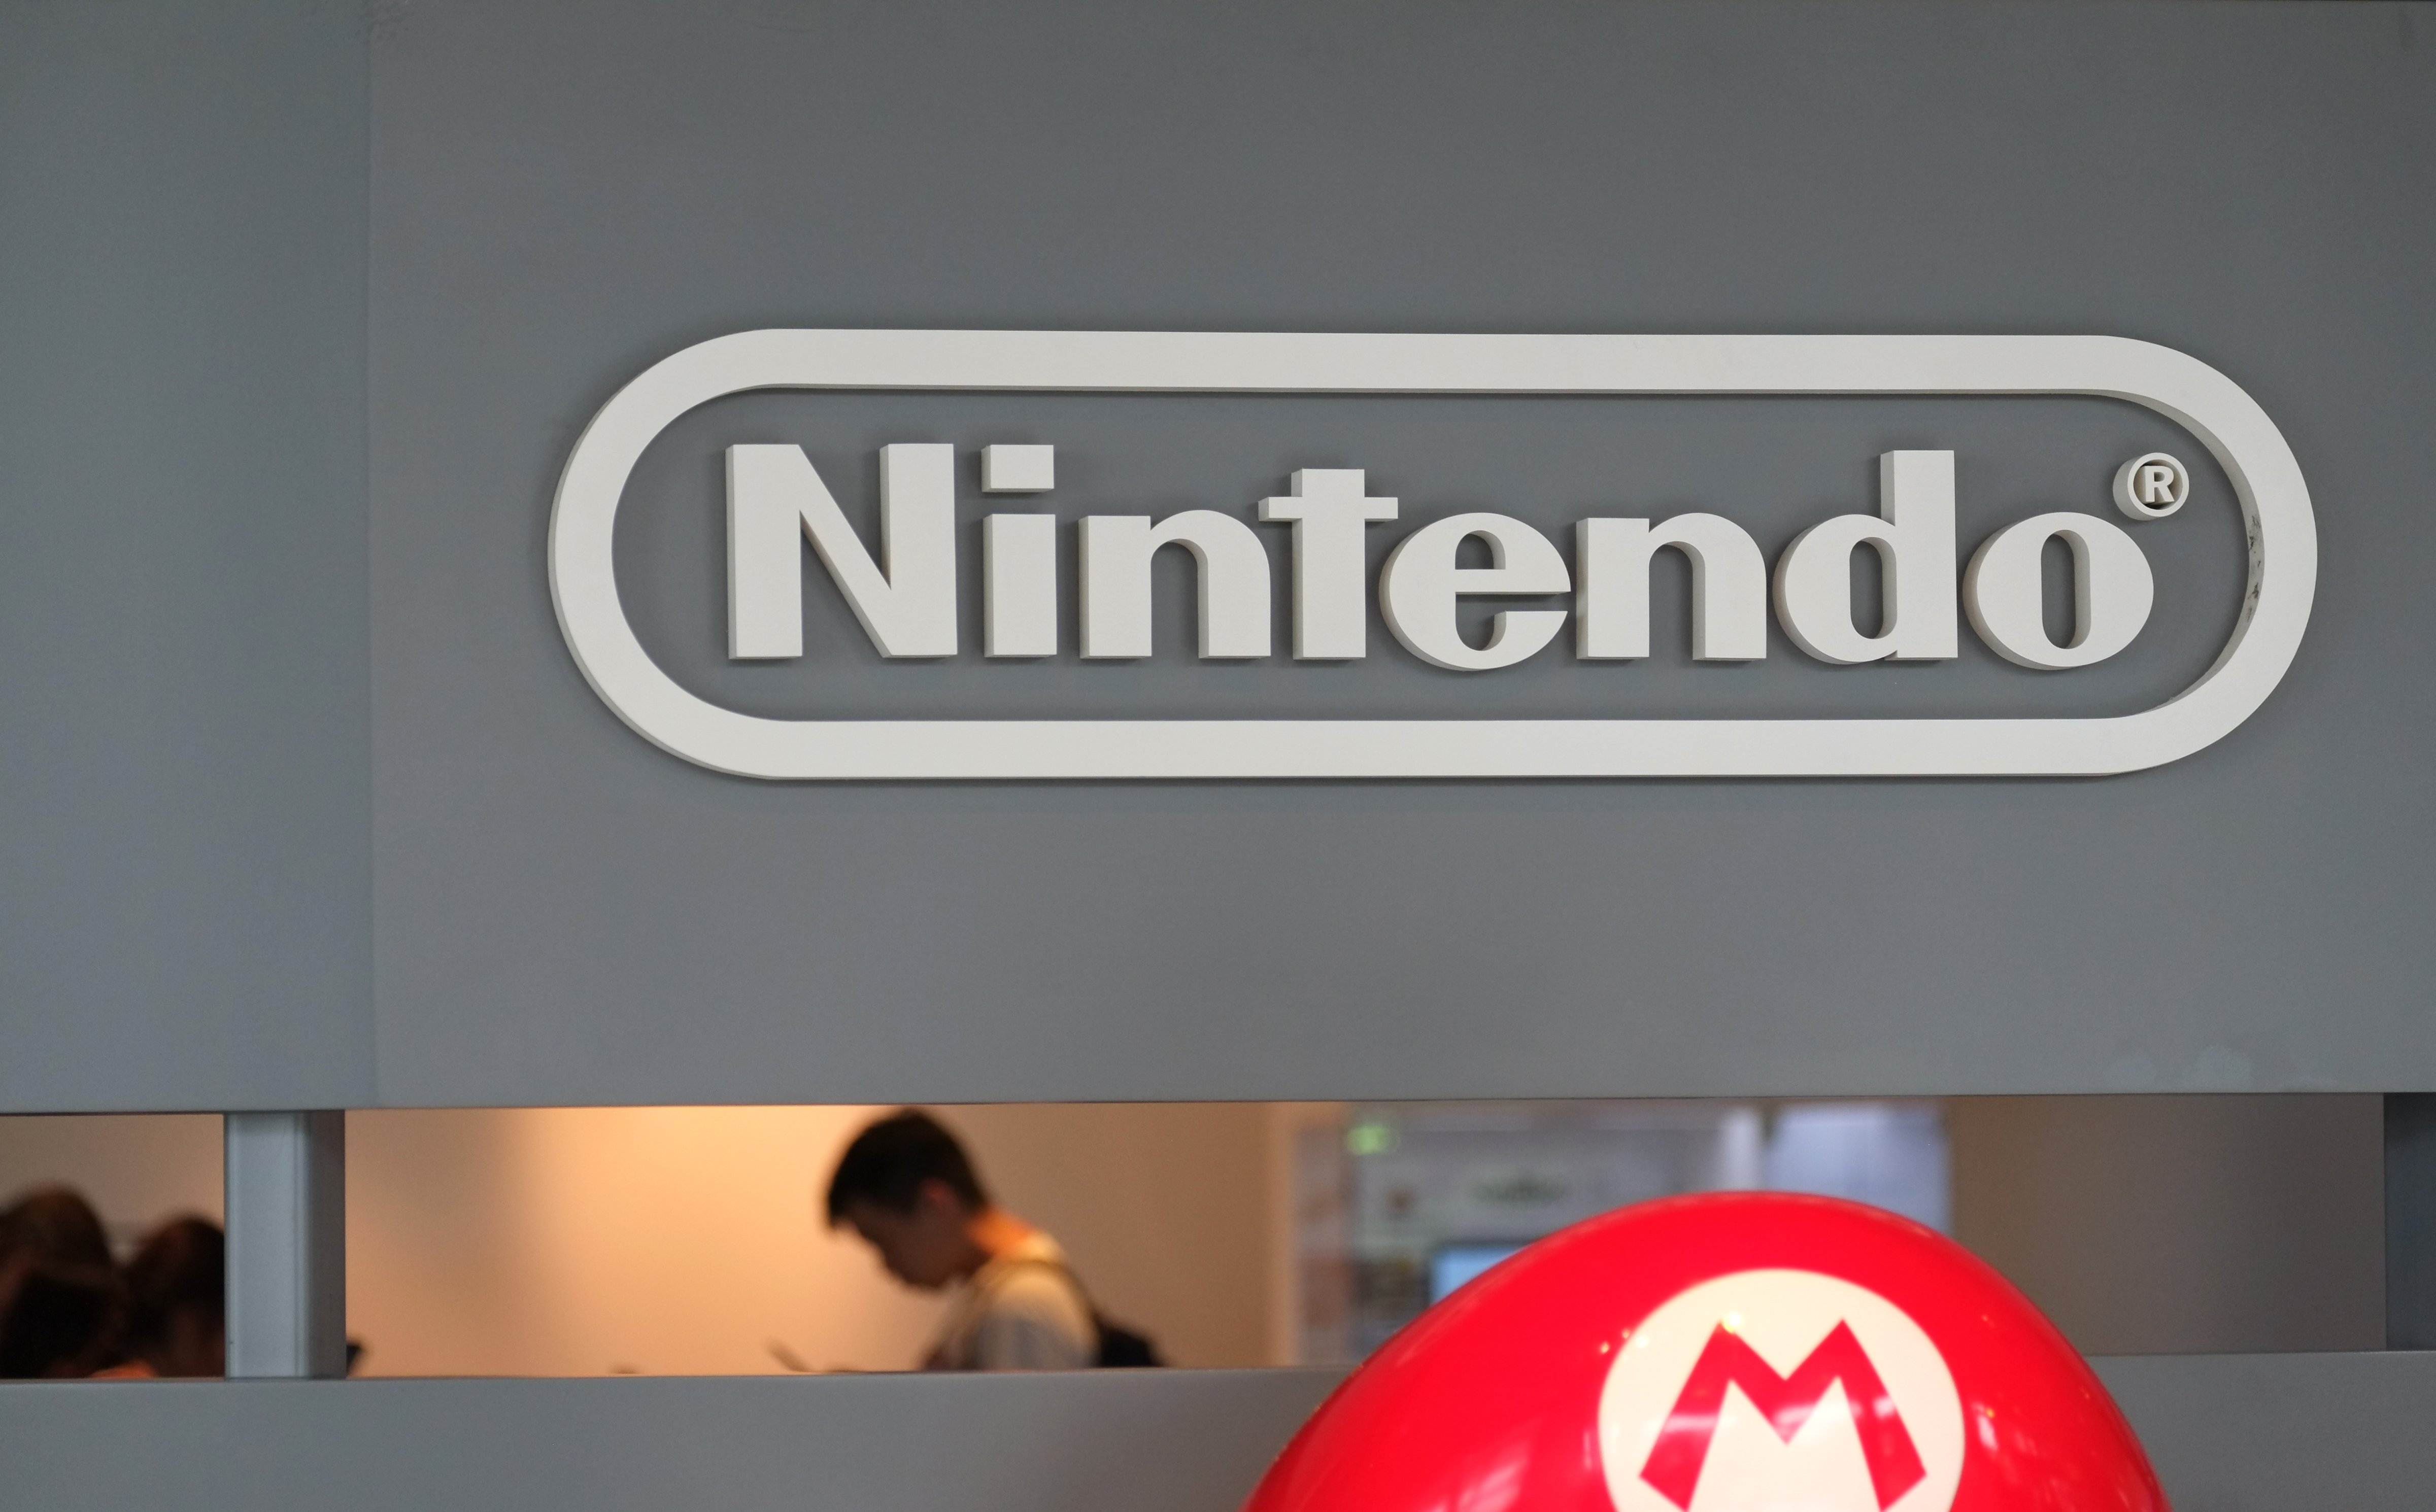 The logo of Japanese gaming giant Nintendo is displayed at a show room in Tokyo on July 20, 2016. (KAZUHIRO NOGI—AFP/Getty Images)